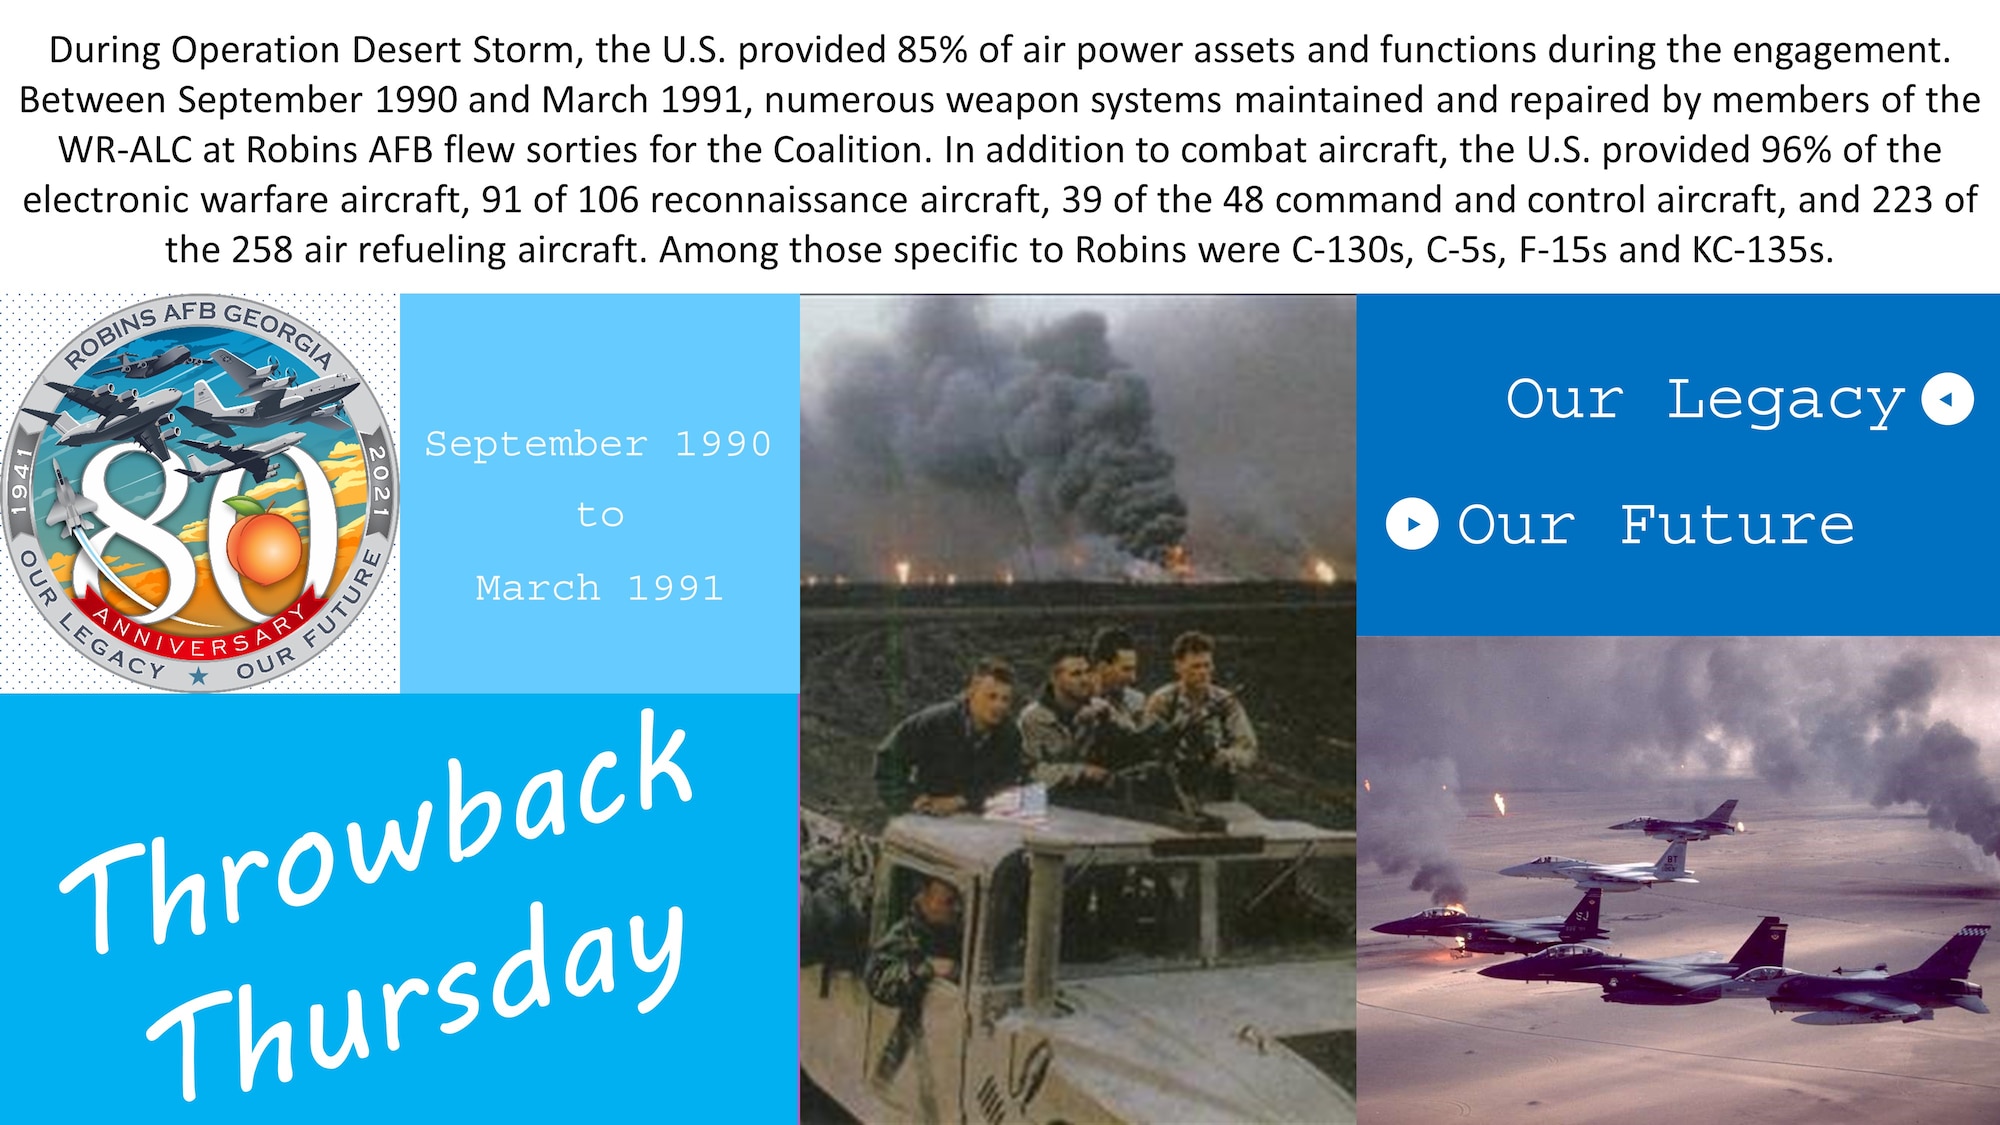 Graphic shows photos of aircraft and personnel from Desert Storm